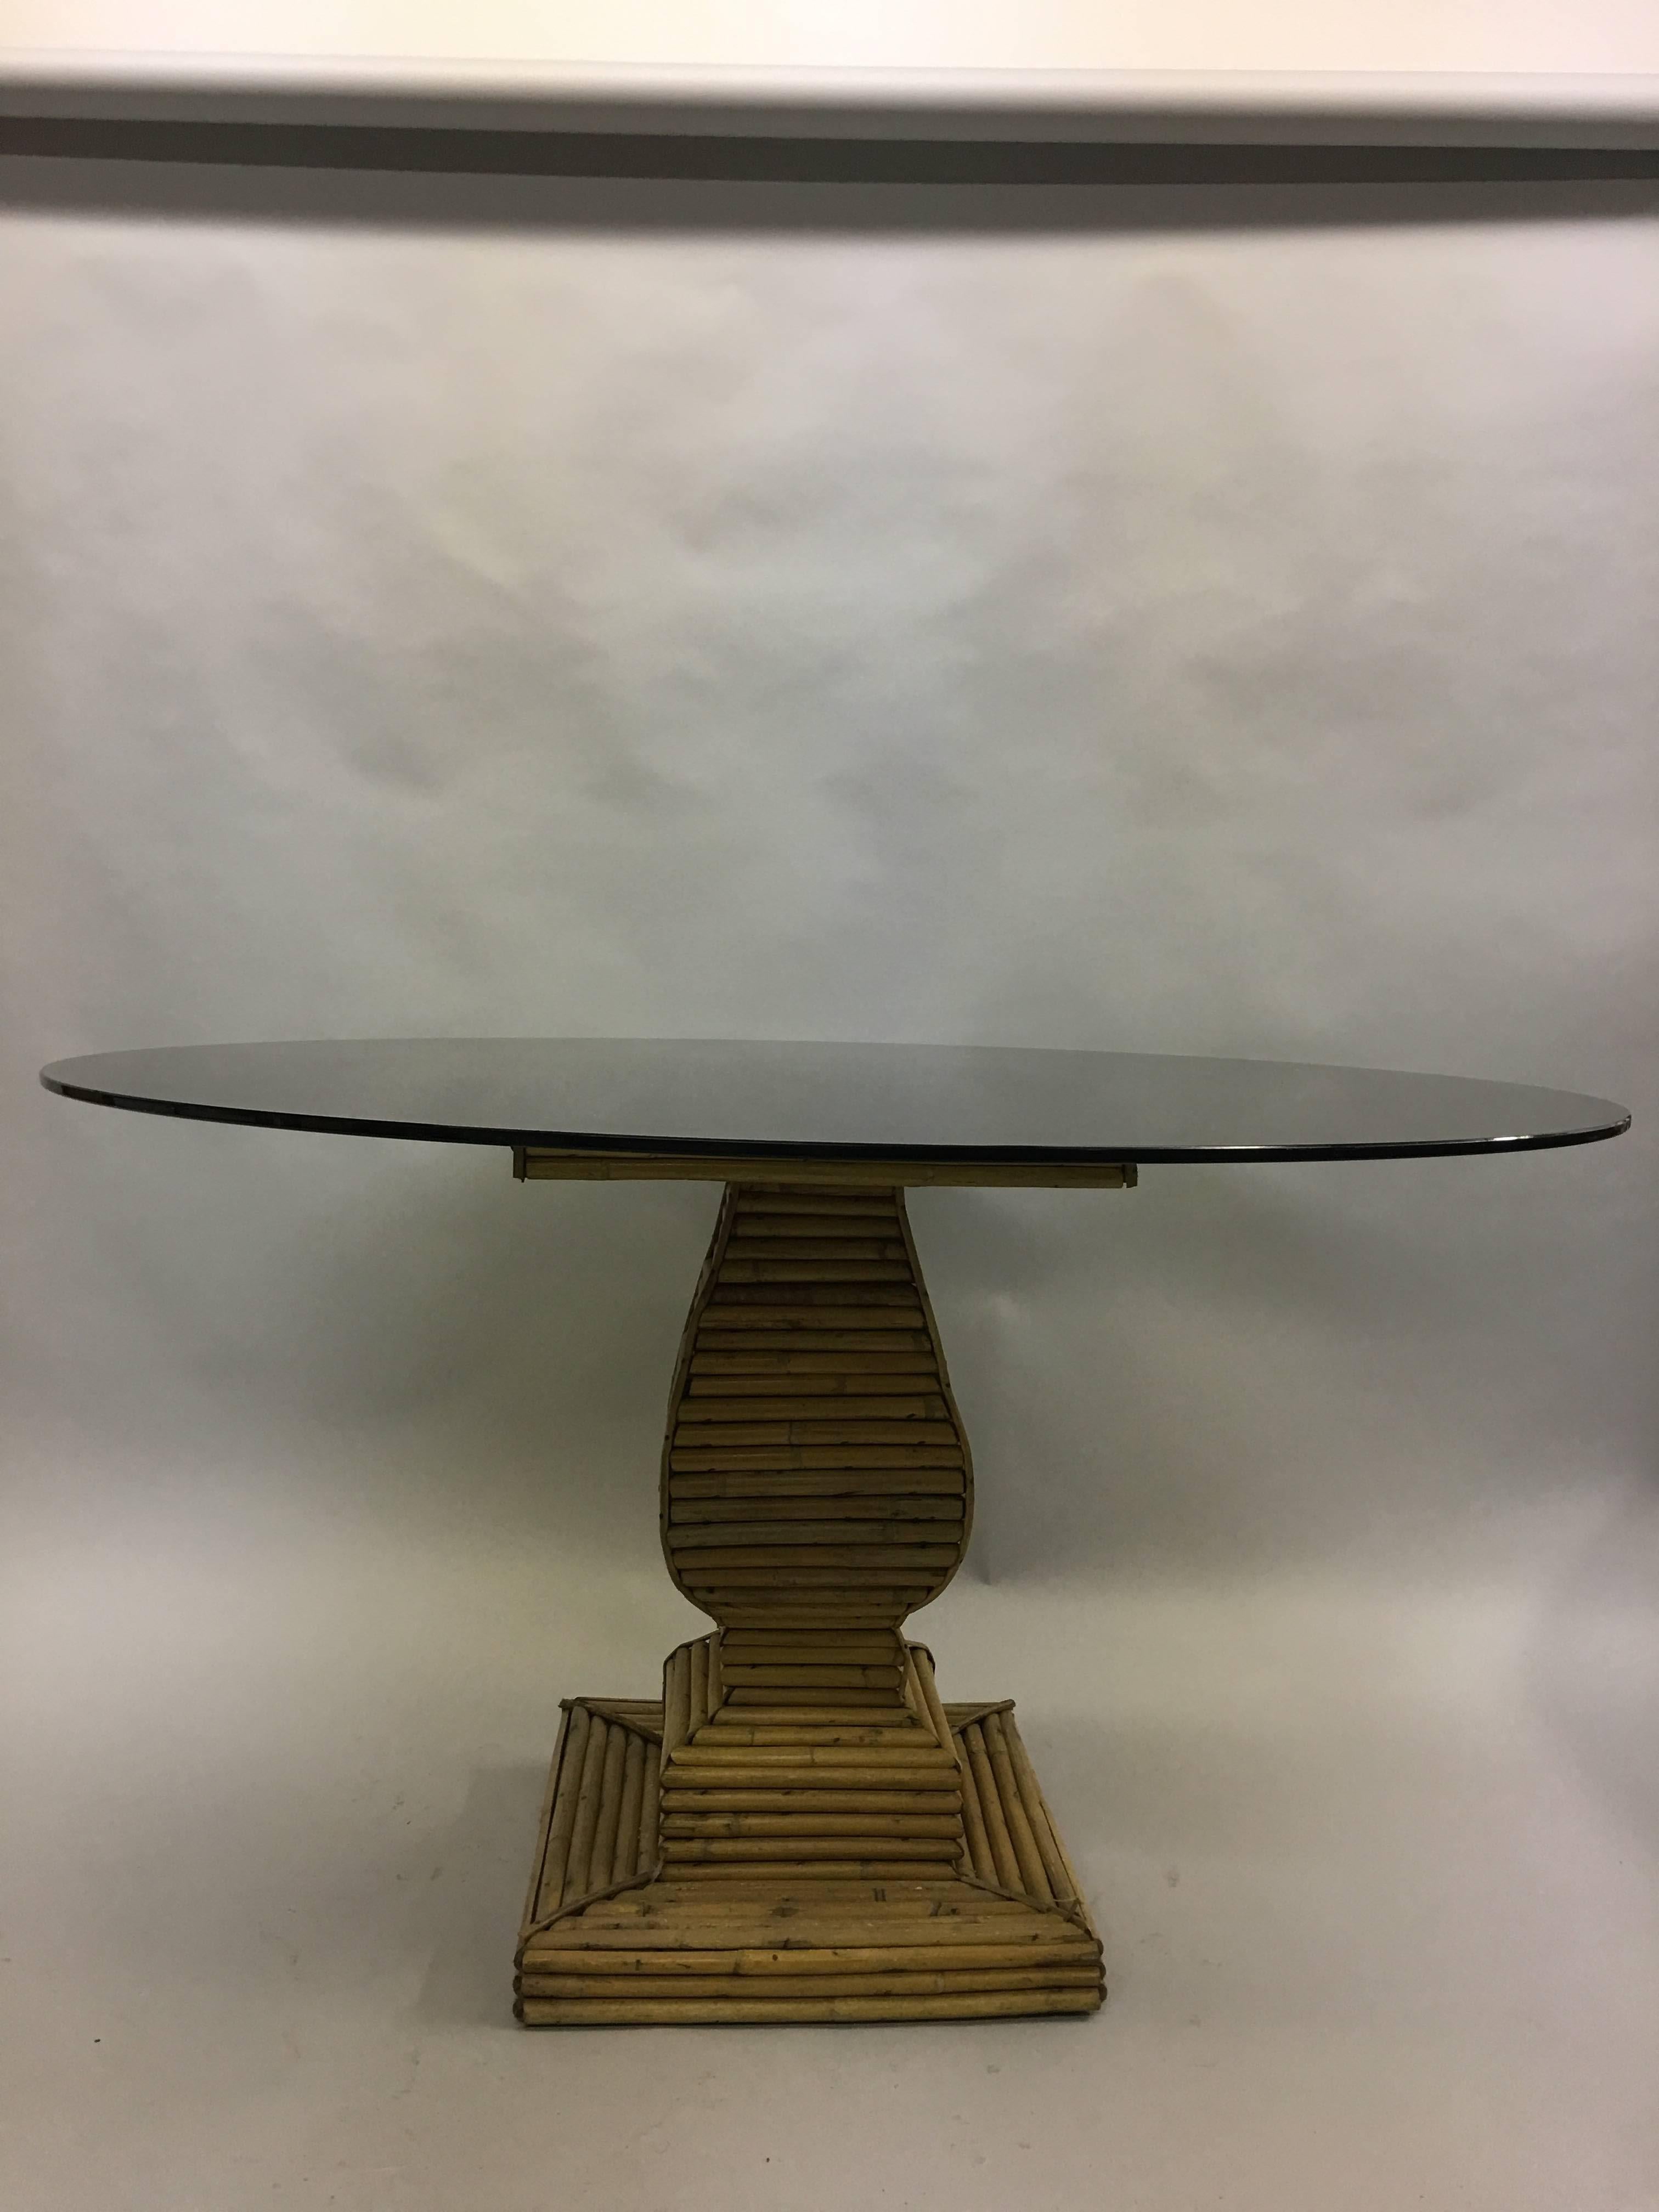 French modern neoclassical dining table base or sofa table base in rattan / bamboo by Jean-Charles Moreux, 1940. 

This table will accommodate a round or square piece of glass to form beautiful dining table. Suggested glass size can range from 48 to